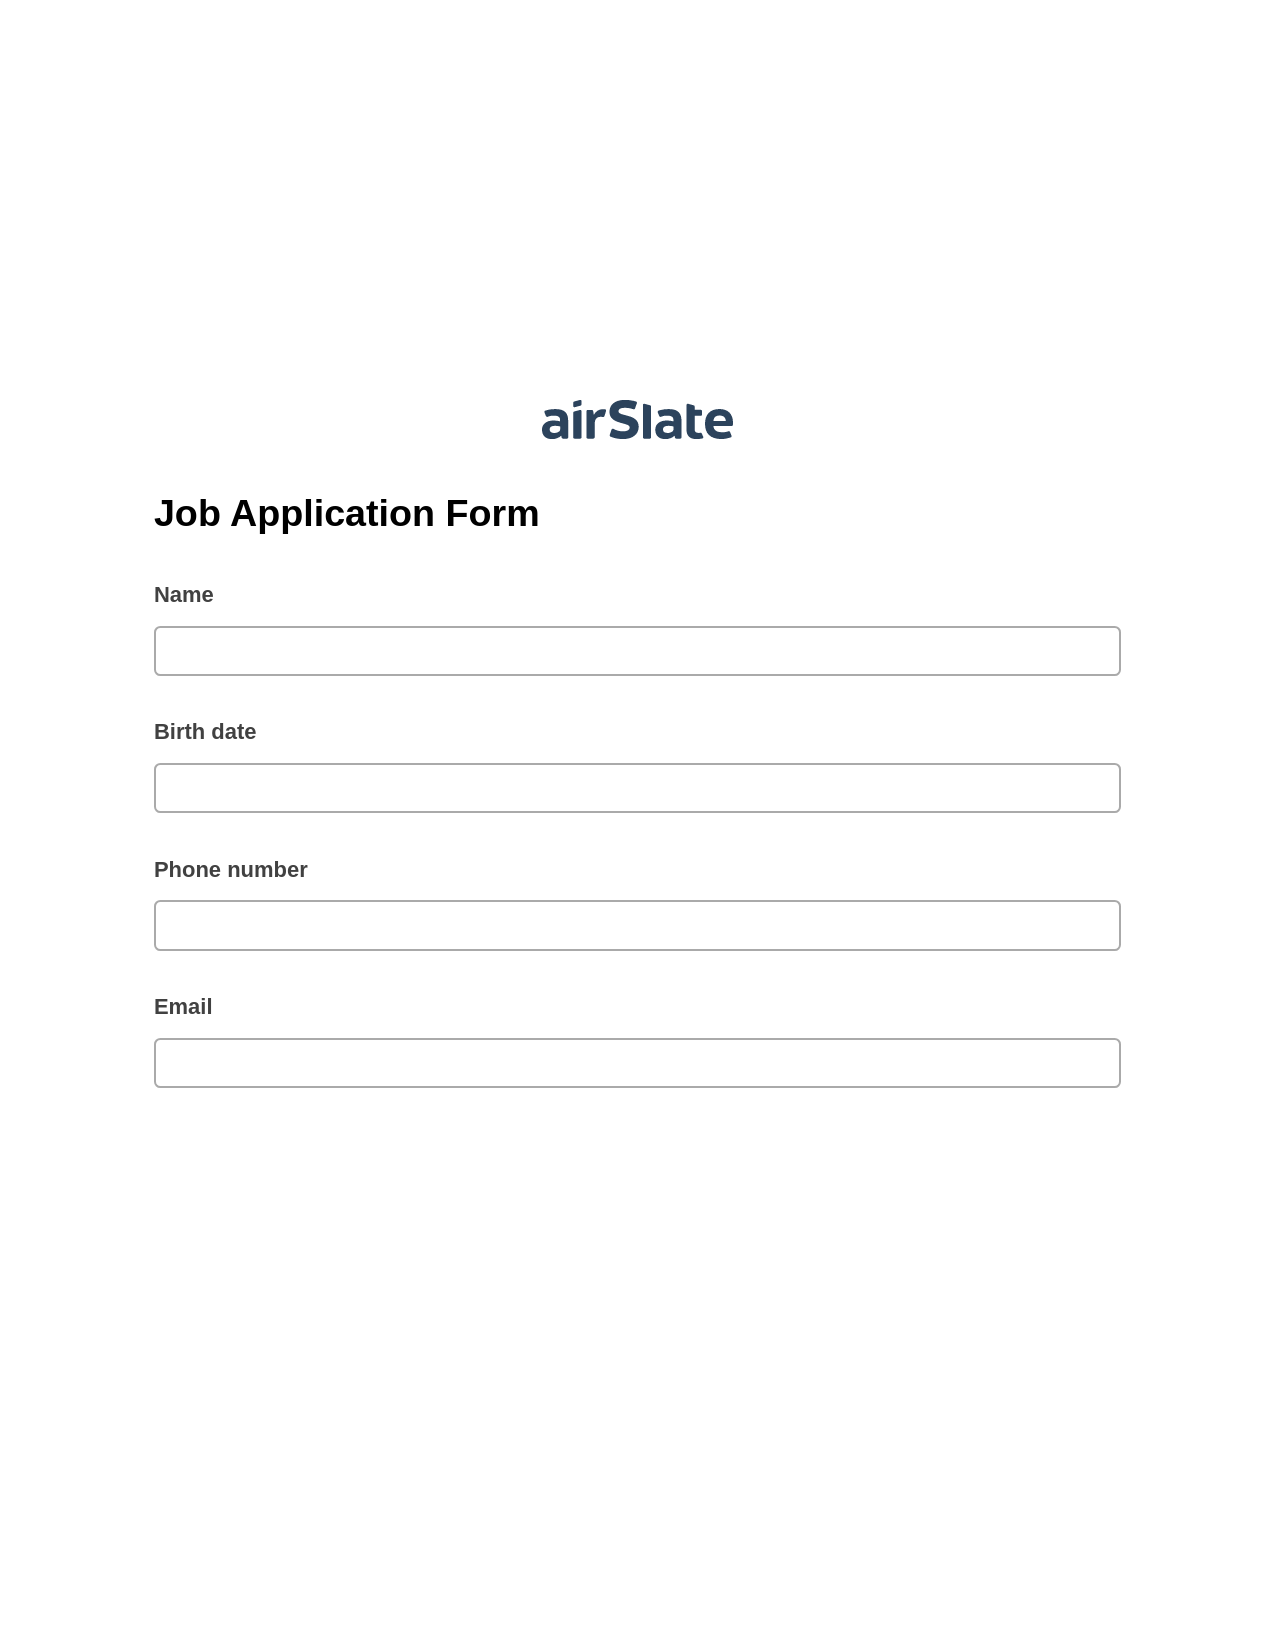 Job Application Form Pre-fill from Google Sheet Dropdown Options Bot, Document Hide Bot, Export to Formstack Documents Bot